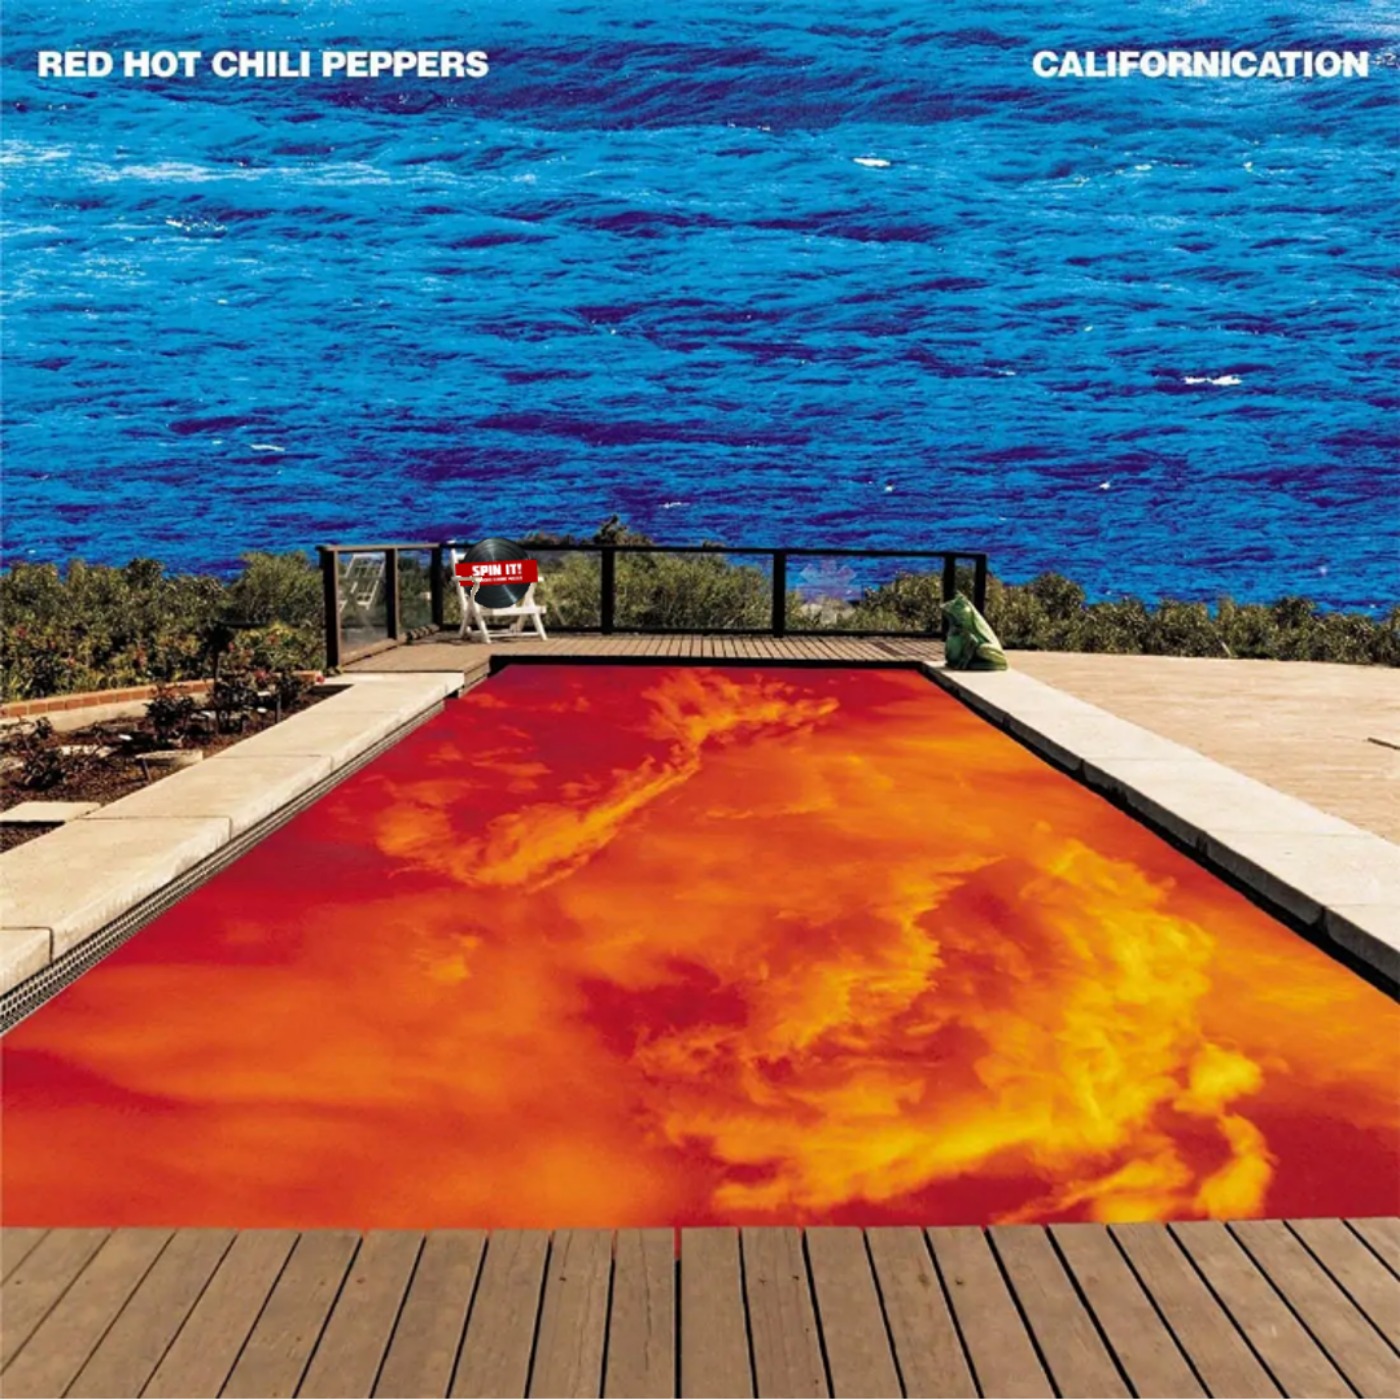 Californication - Red Hot Chili Peppers: Episode 47